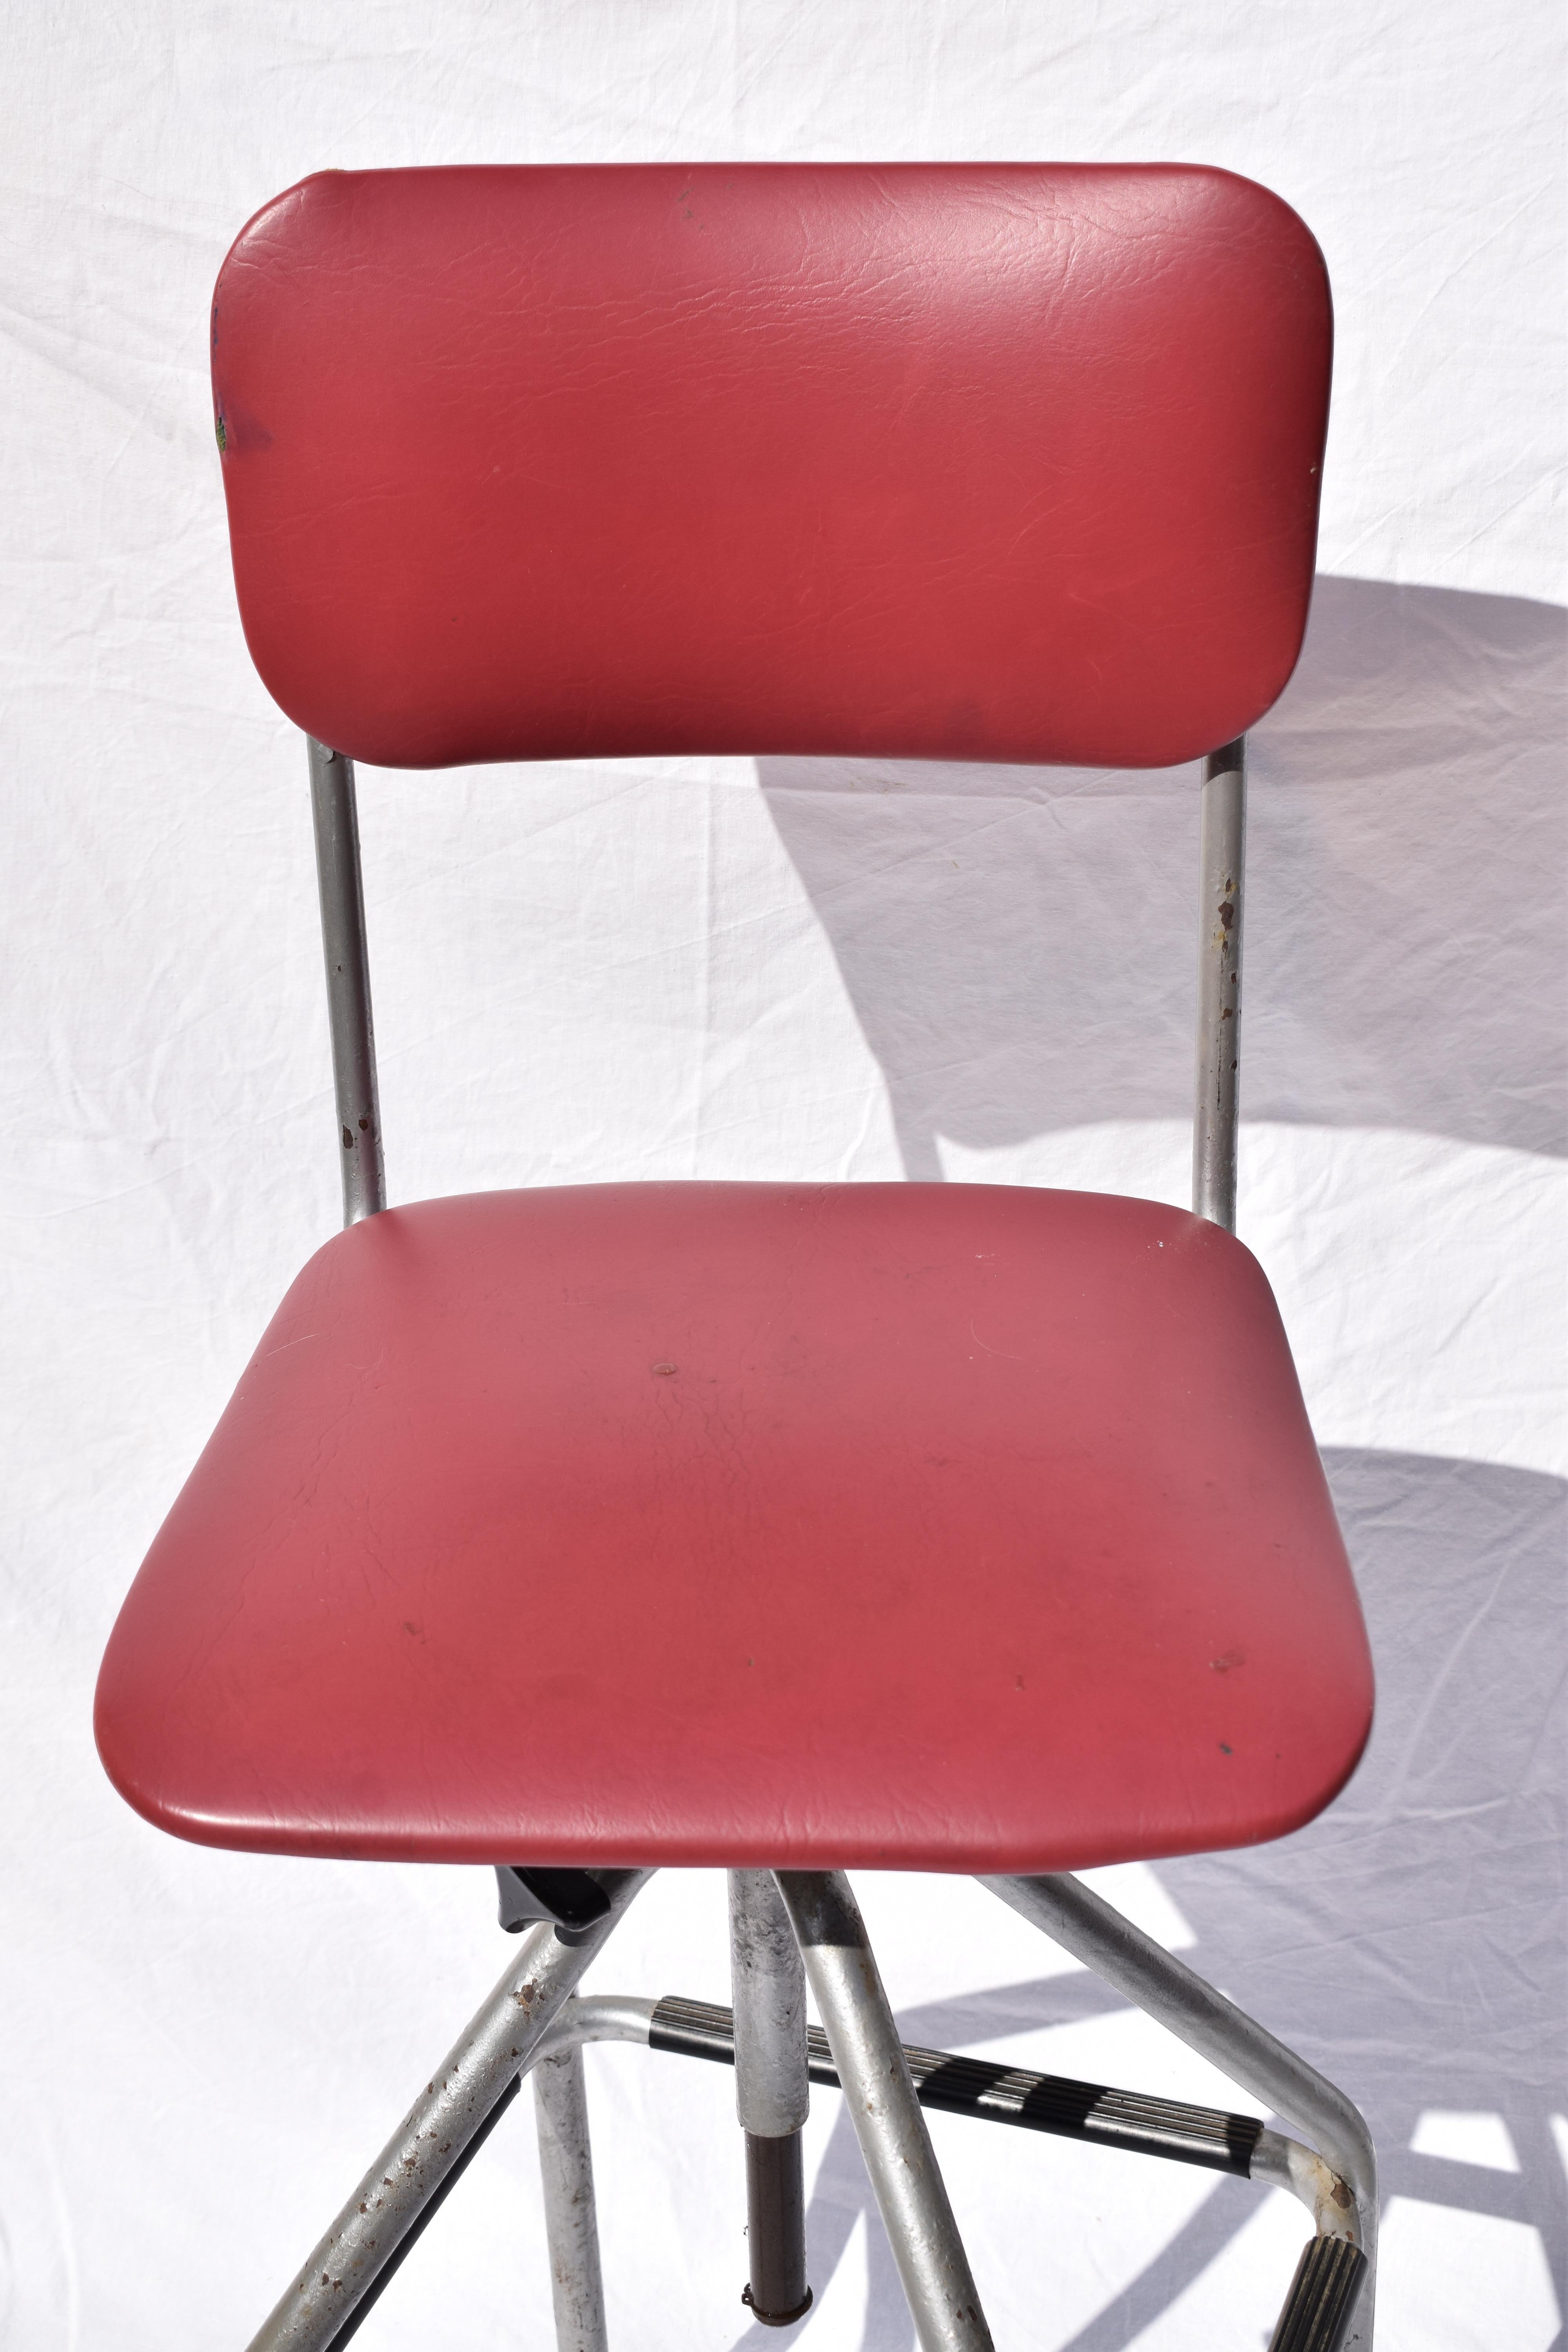 20th Century 1940s - 1950s Industrial English Red Drafting Swivel Chair